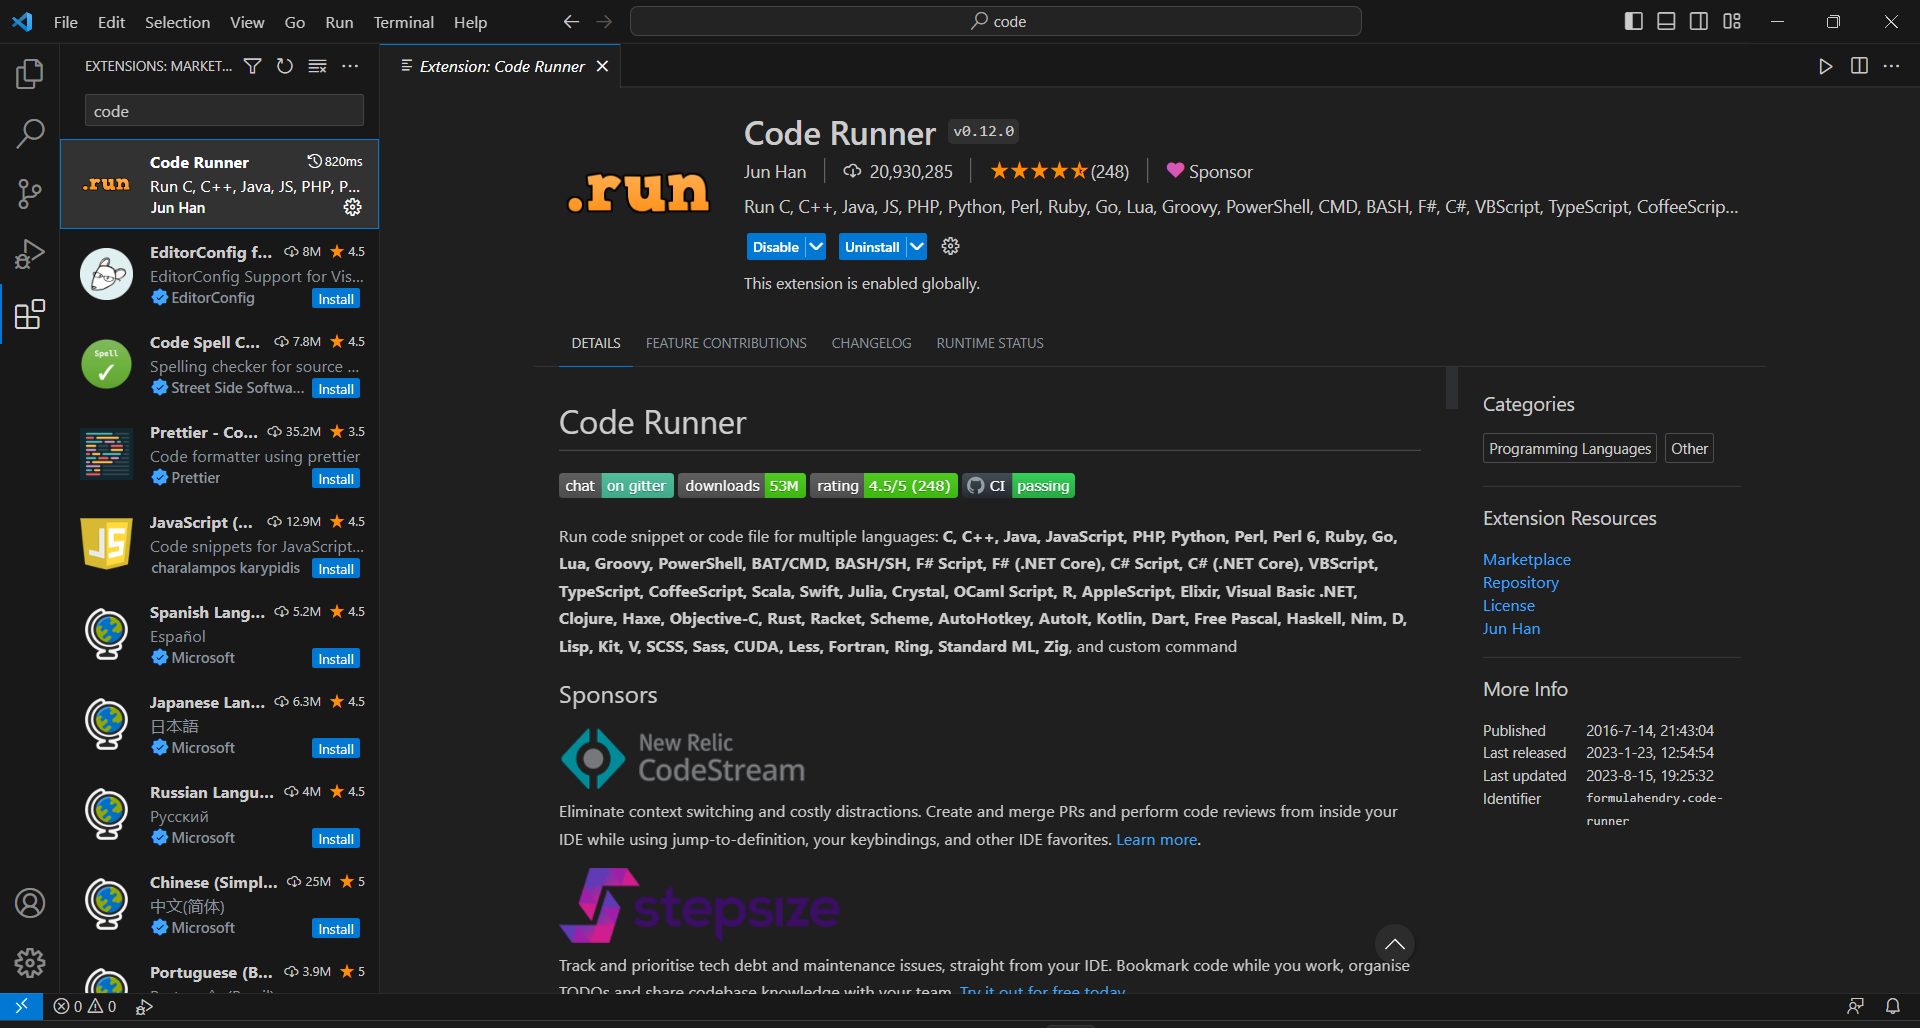 screenshot of code runner extension page